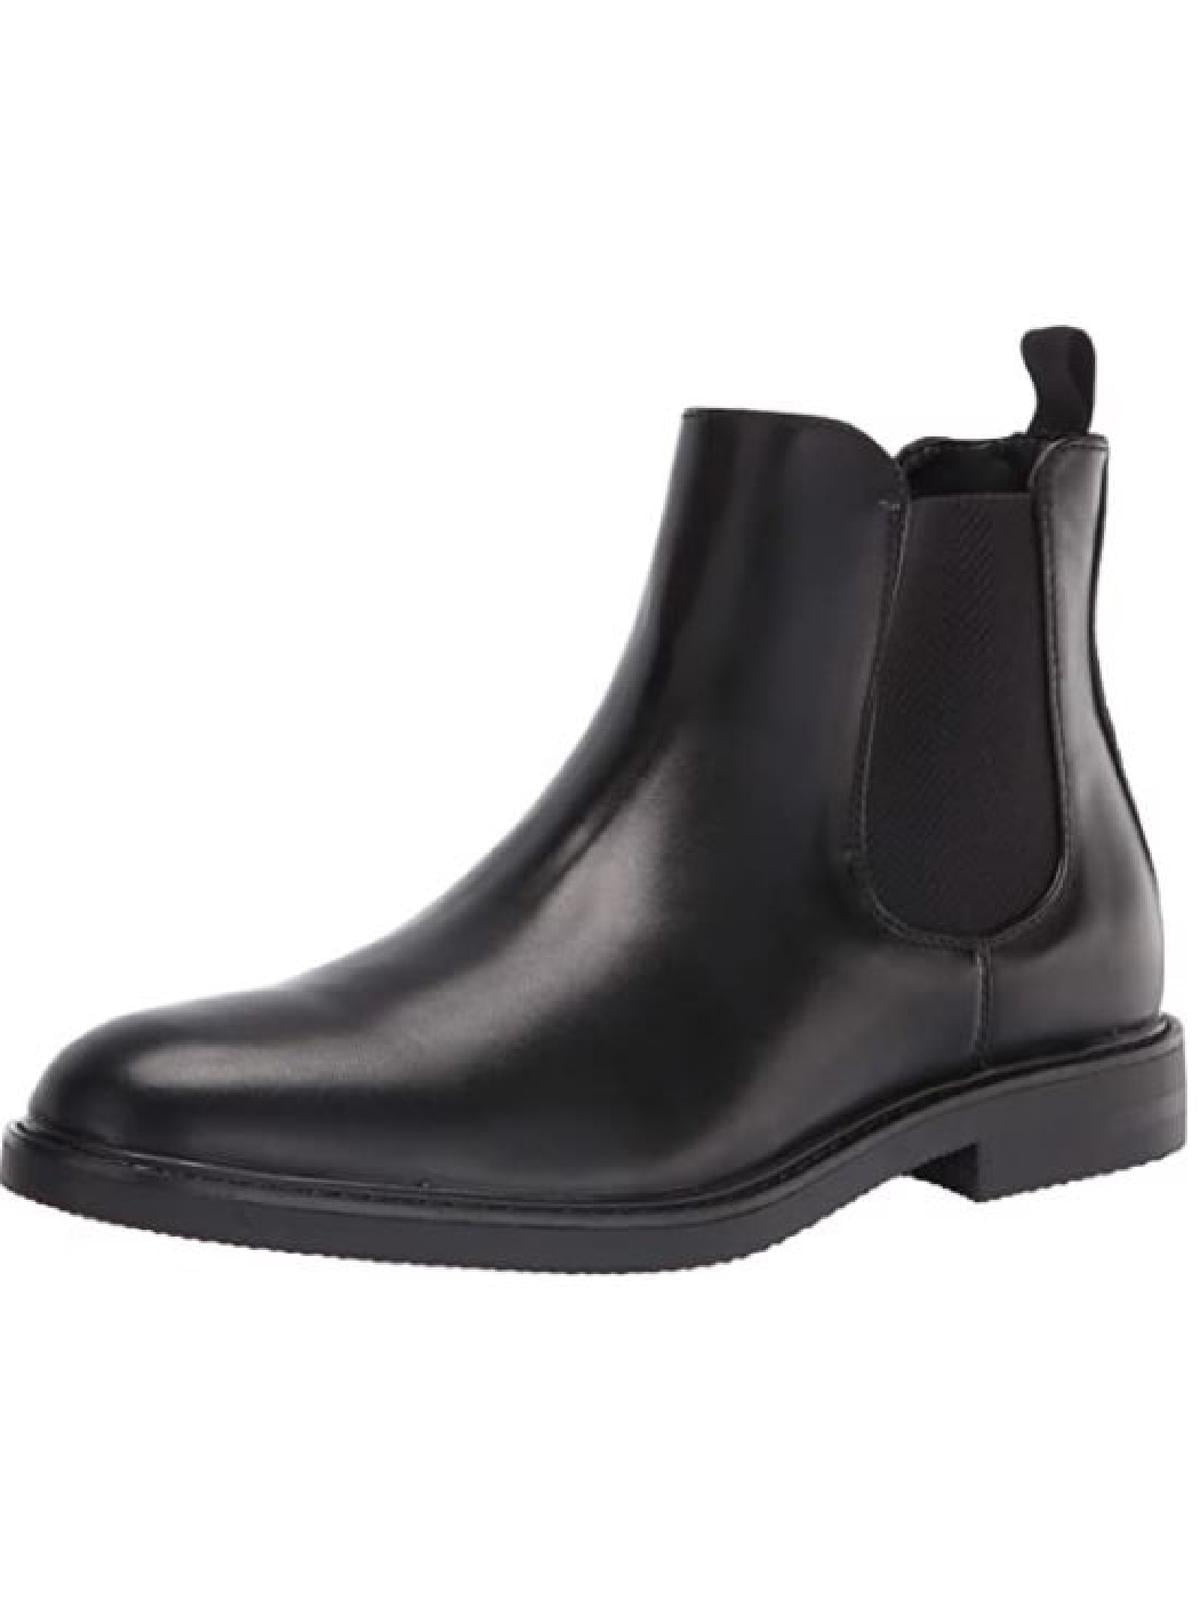 Unlisted by Kenneth Cole Men's Peyton Faux Leather Chelsea Boots ...